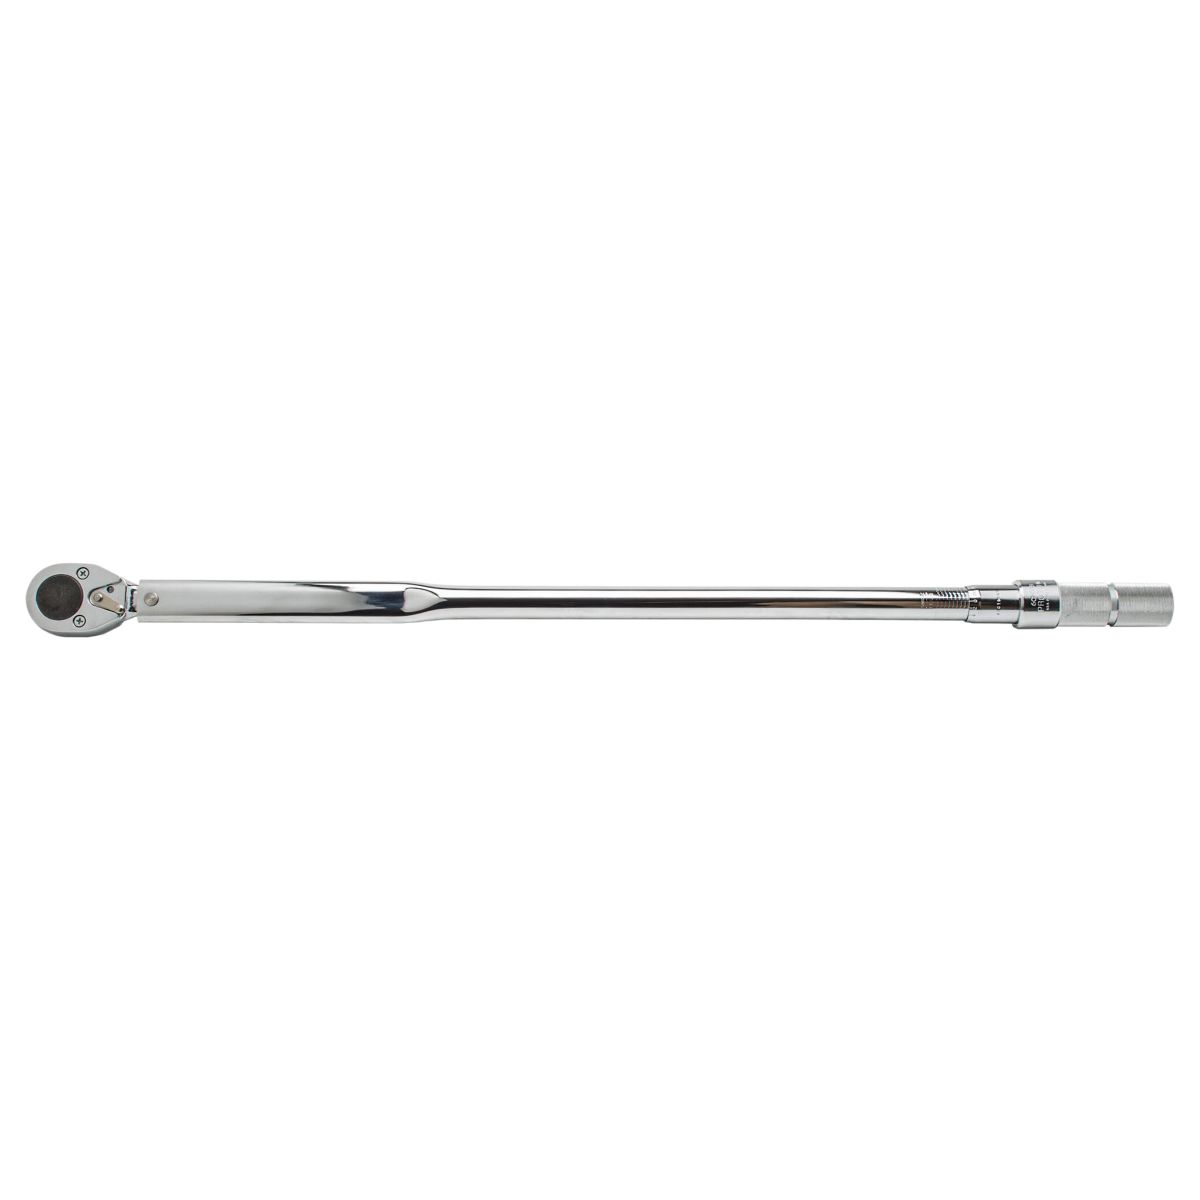 Proto 6020AB 120-600 ft./lbs. Ratchet Foot Pound Torque Wrench — 3/4" Drive